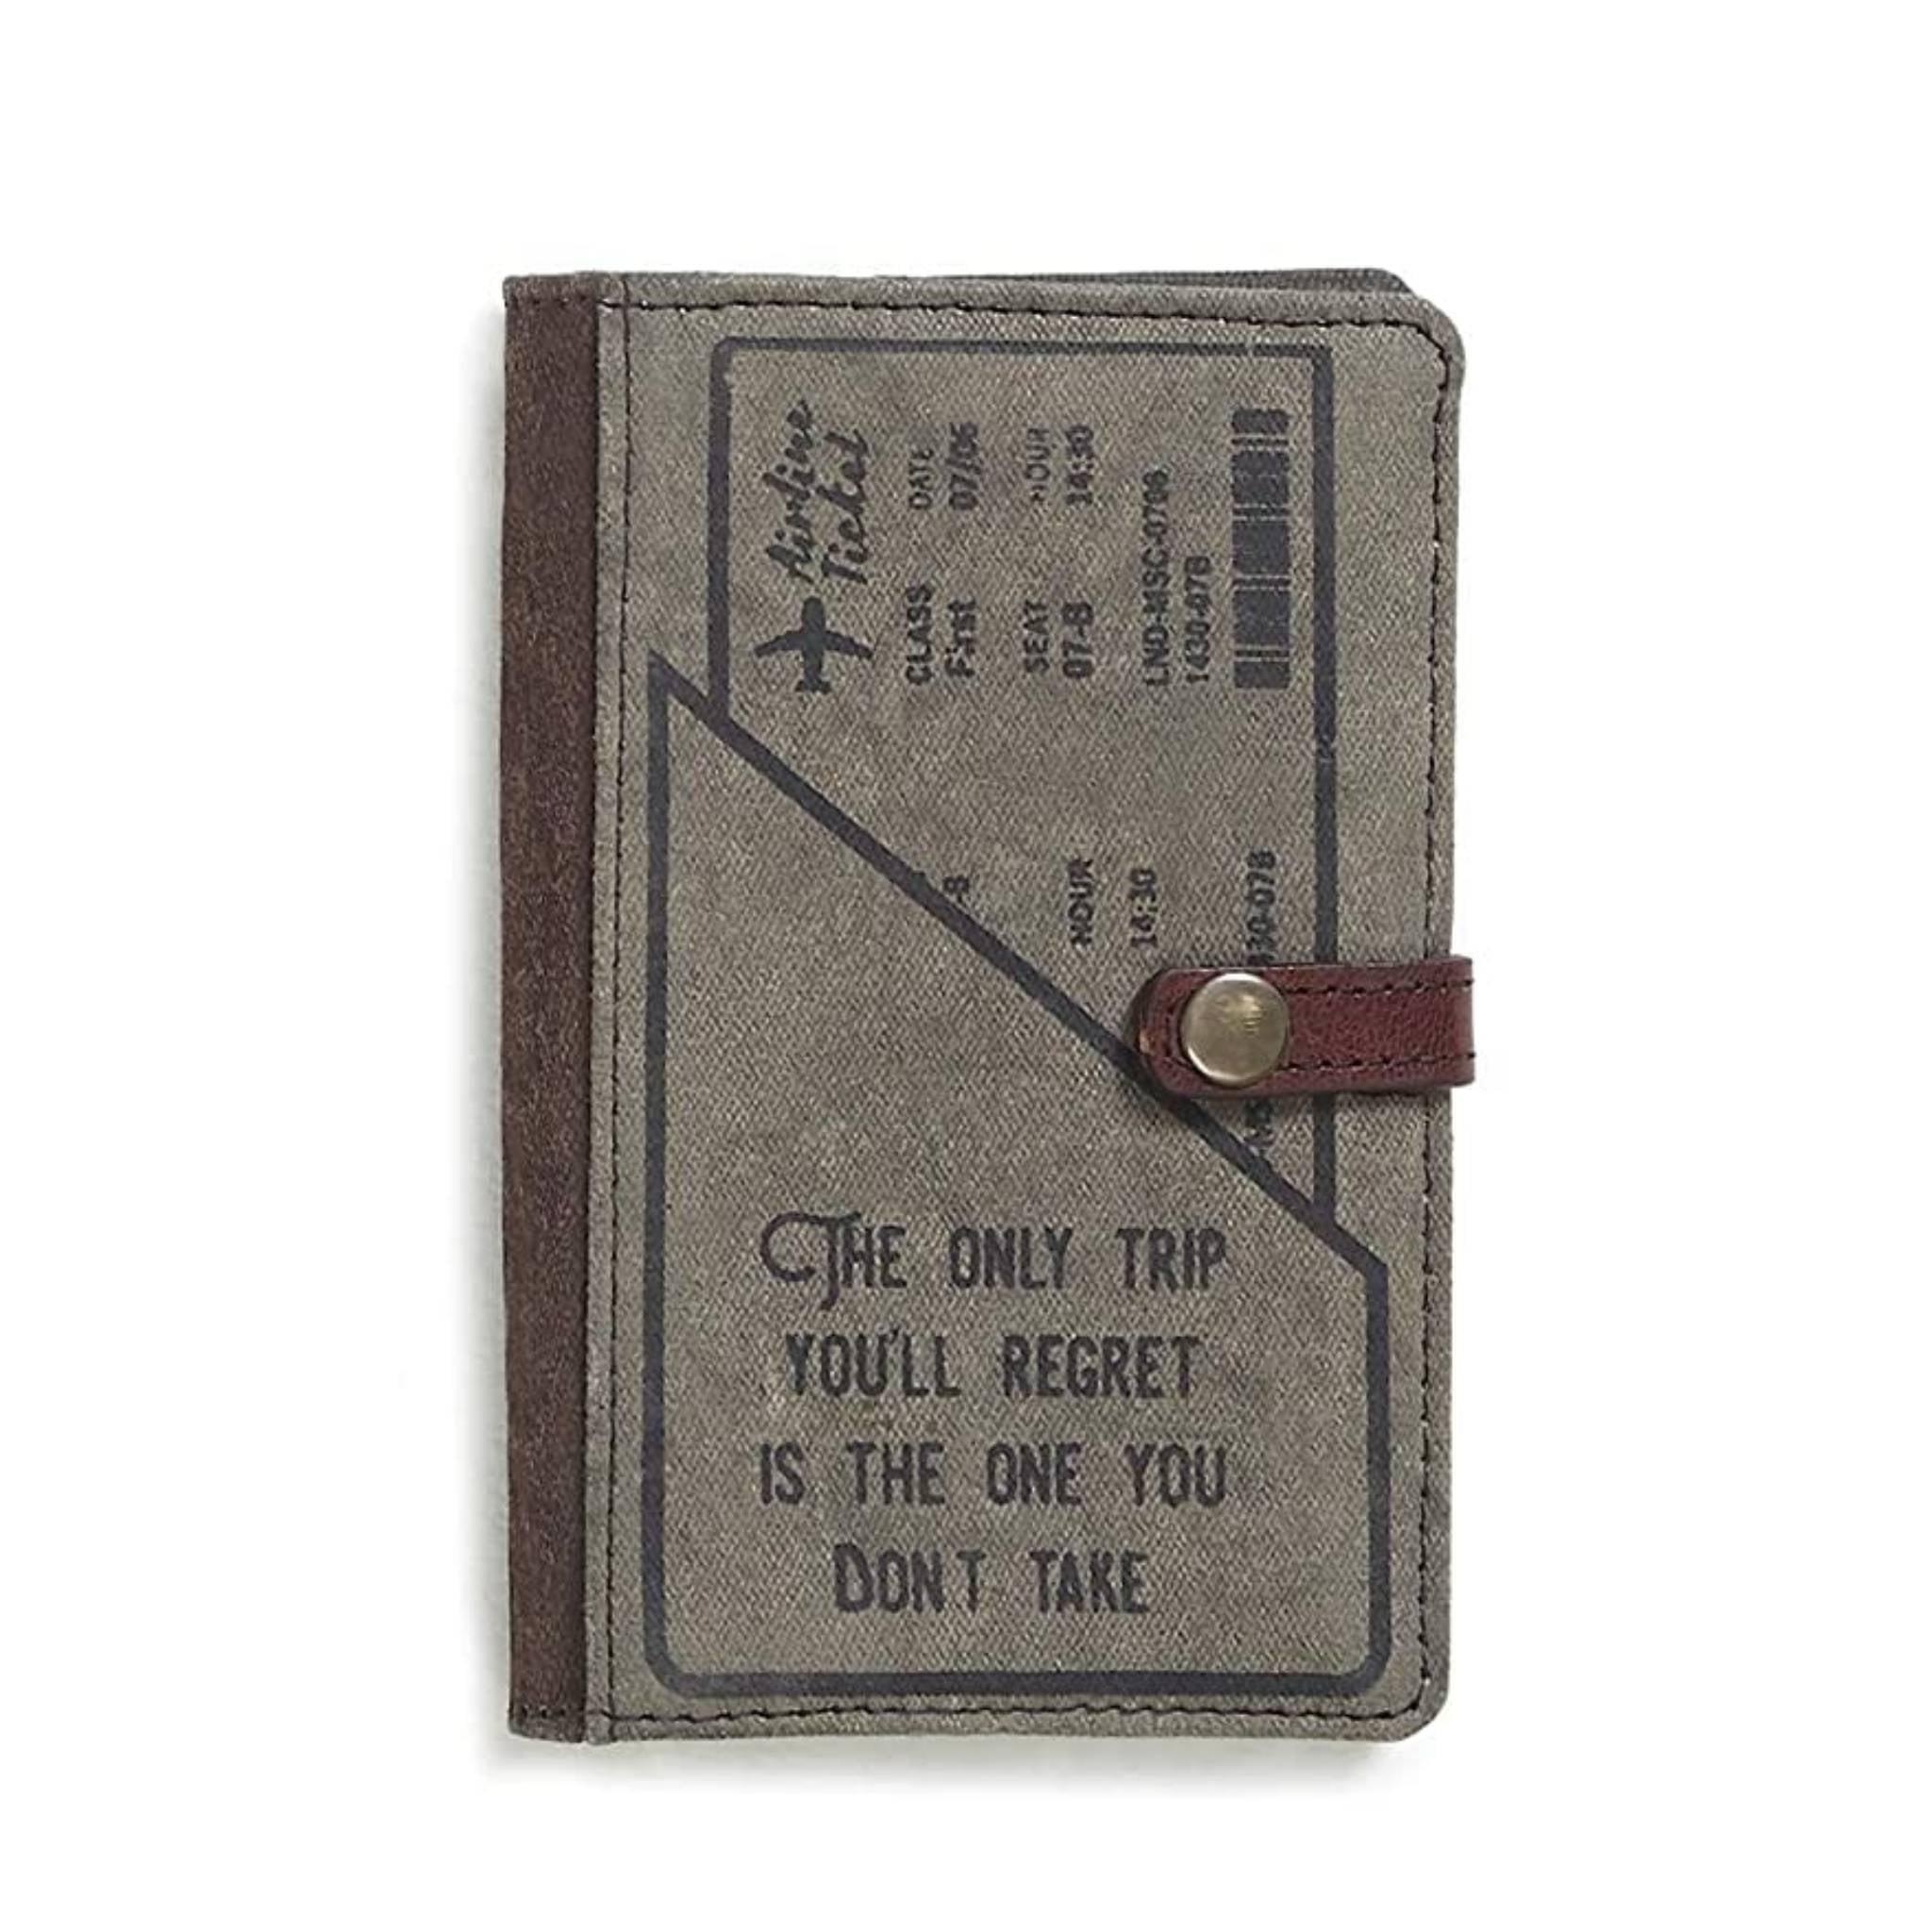 Mona B Trip Regrets Upcycled Canvas Passport Travel Women's Wallet (Brown)